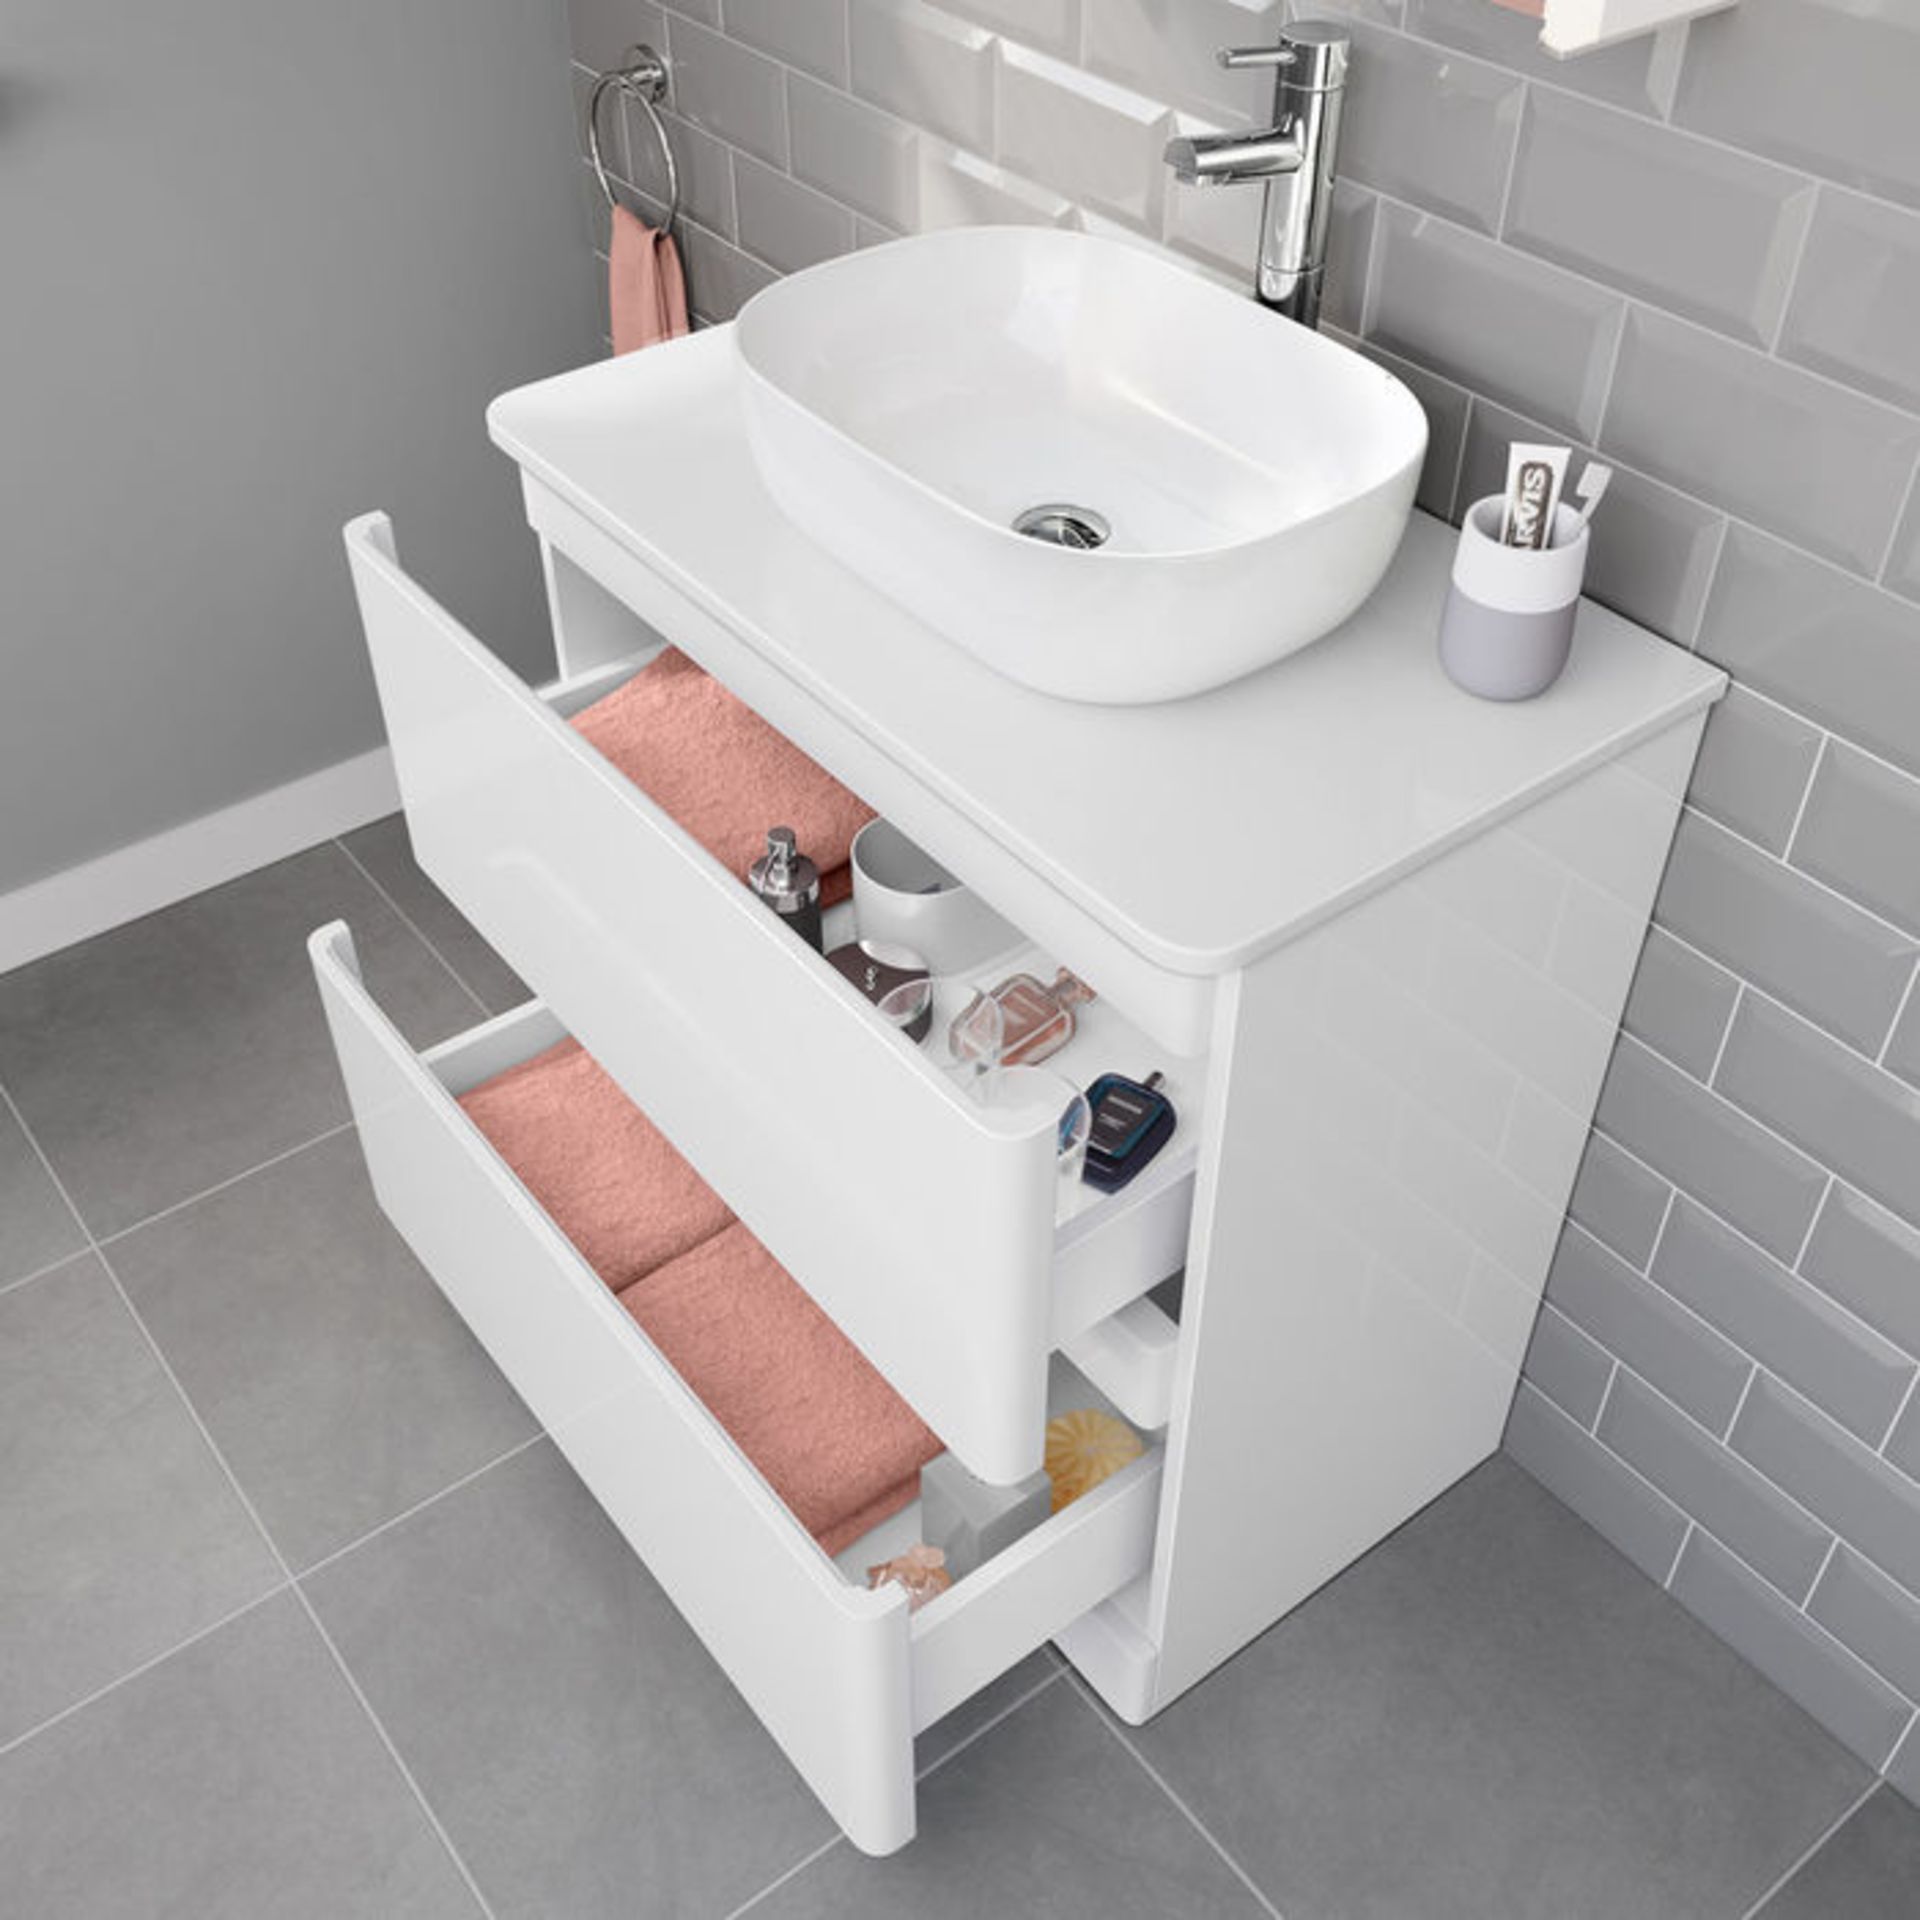 (PT84) 800mm Denver Gloss White Countertop Unit and Colette Basin - Floor Standing. RRP £499.99. - Image 2 of 5